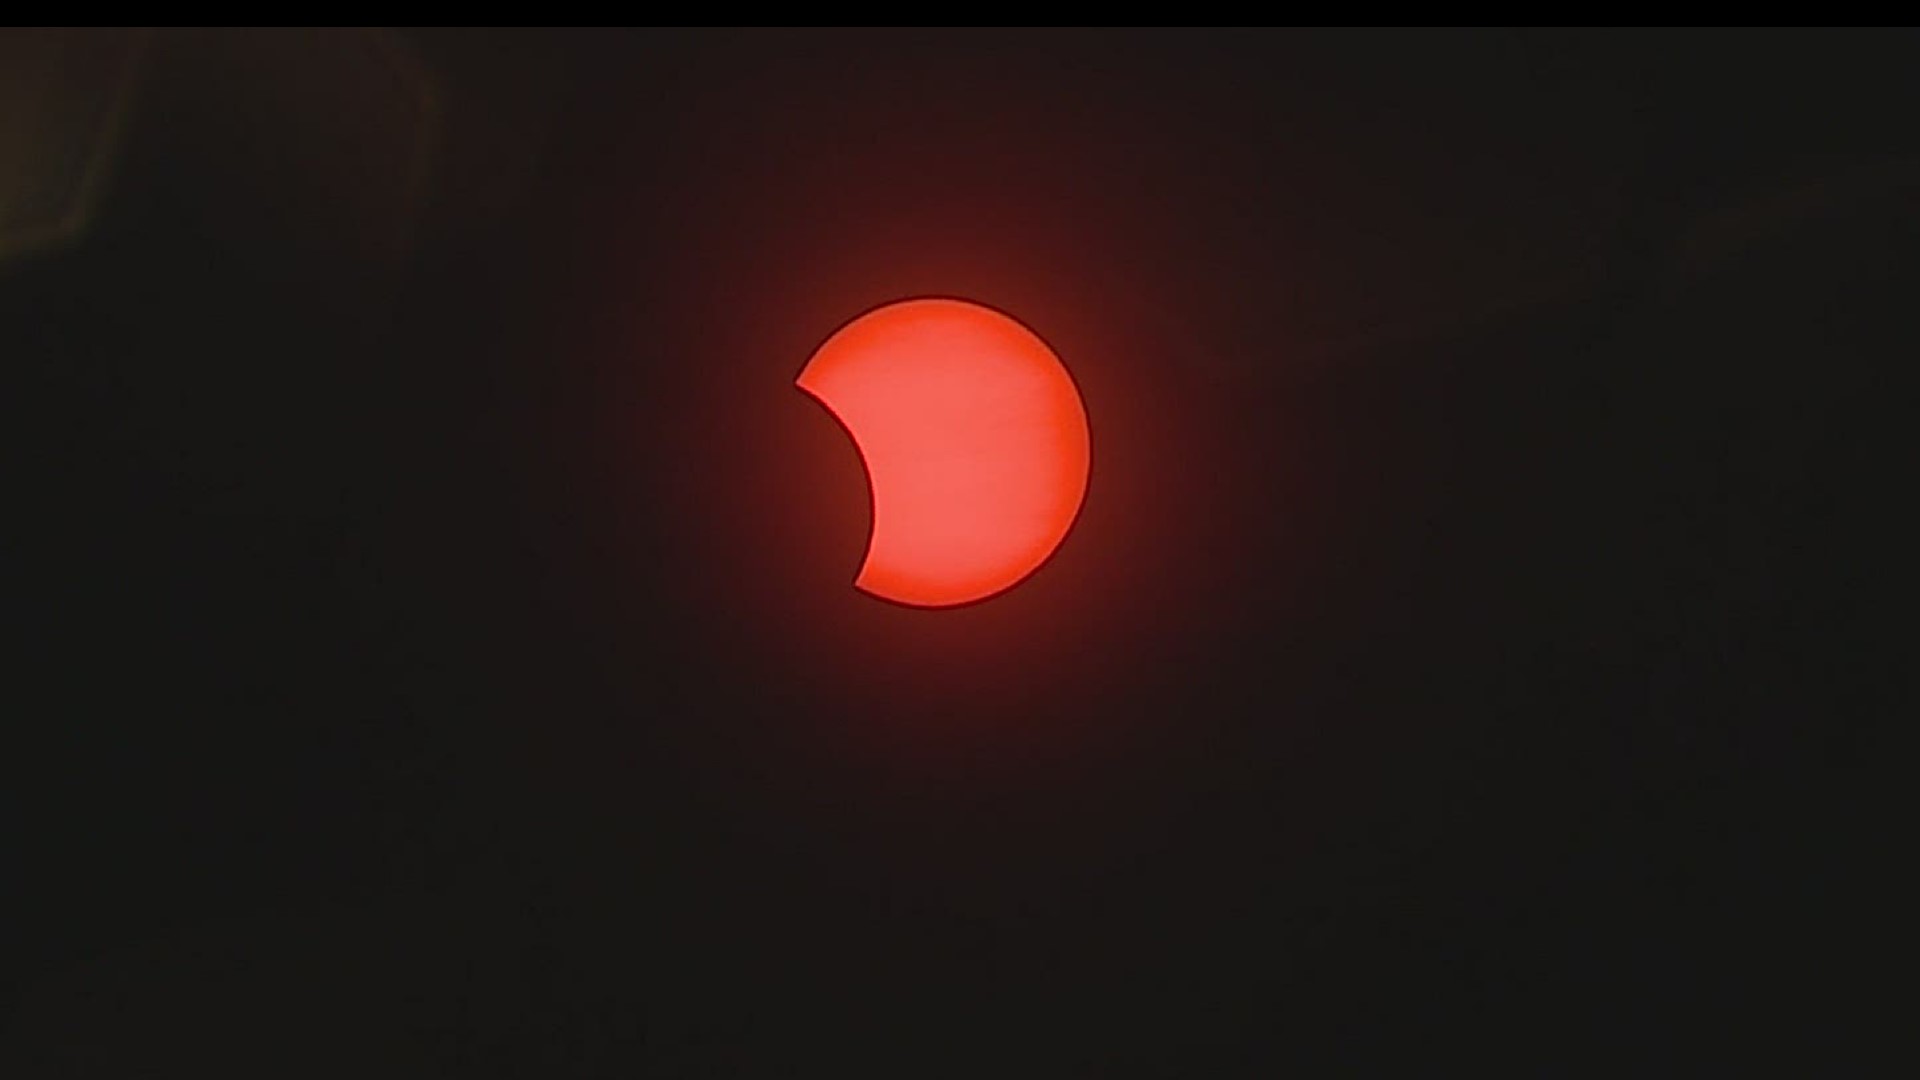 A partial solar eclipse was visible Thursday across the area, but you had to get up early to view it.